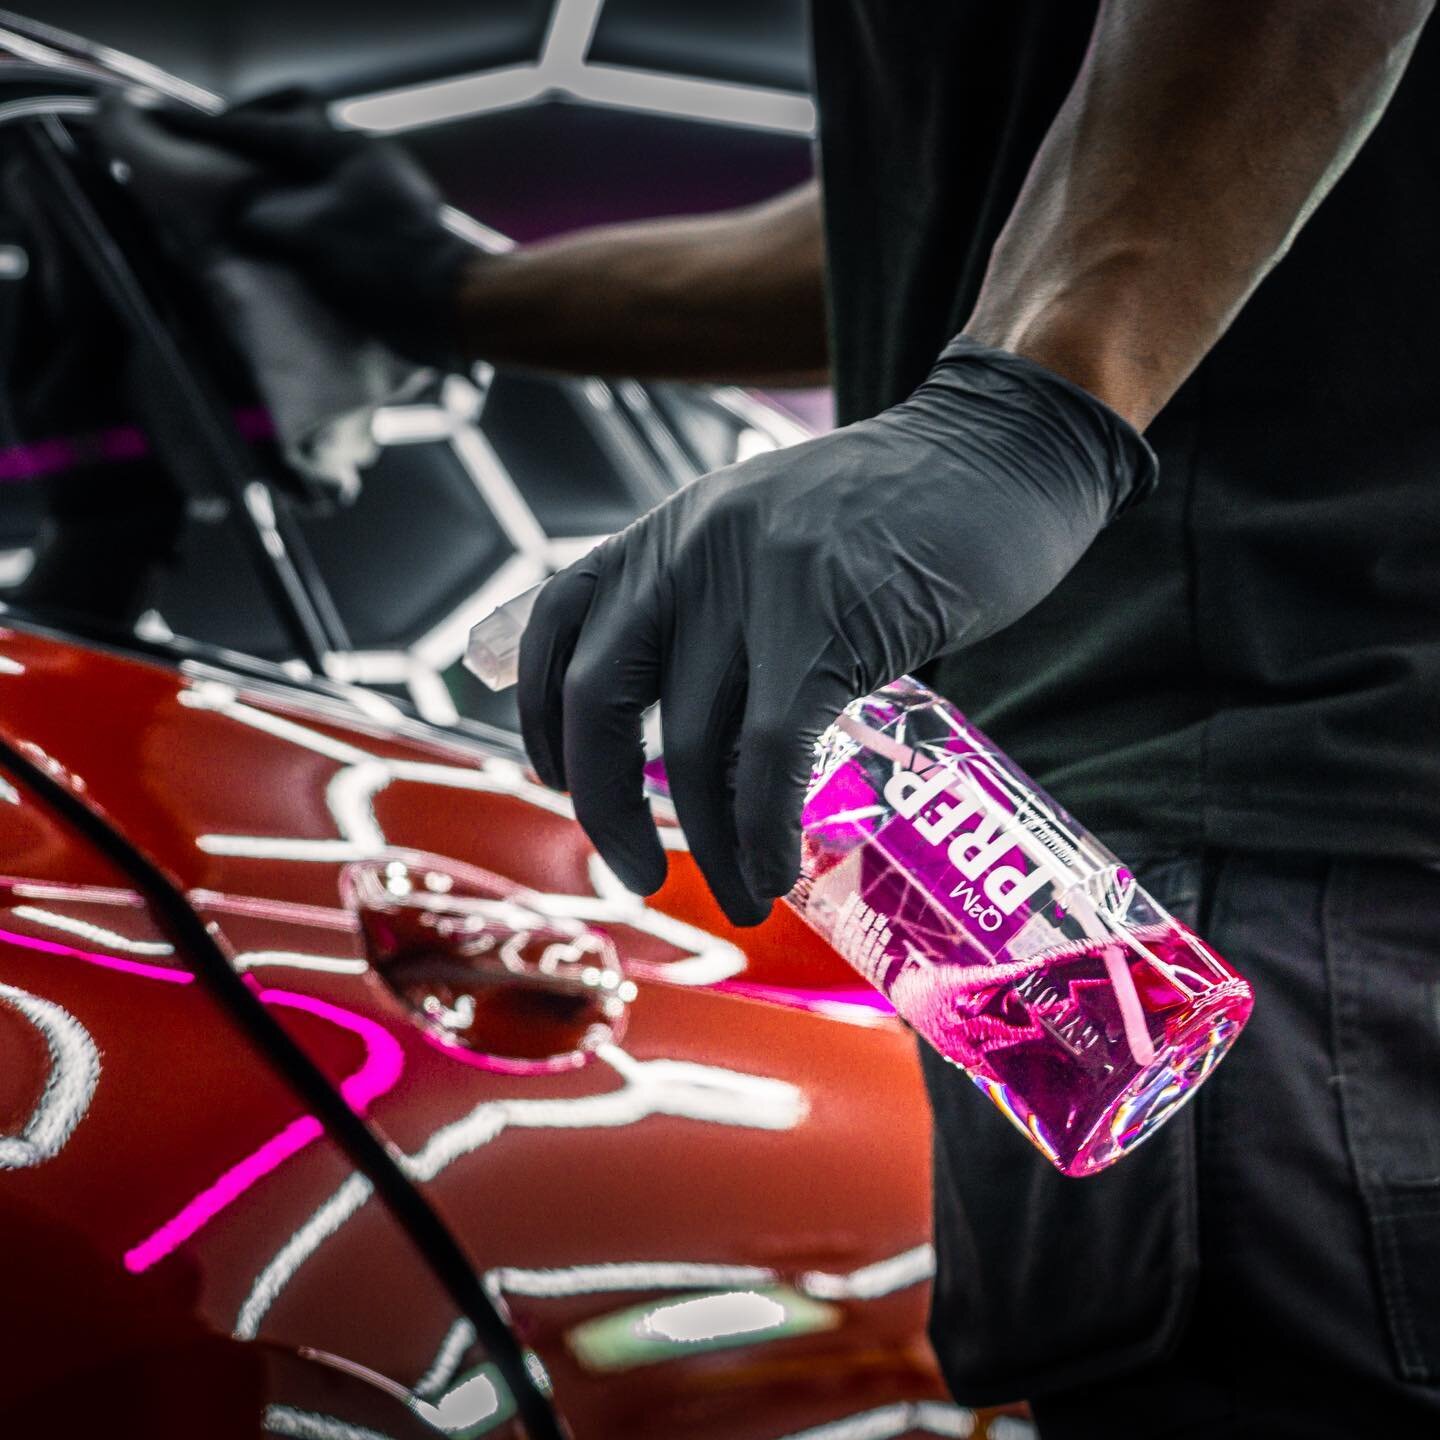 Gyeon Prep to Prep the surface from all residue for coat, PPF, or wrap.
Or just before polishing. 

#gyeonized #car #cars #gyeon #BMW #autodetail #ceramiccoating #gyeonquartz #engine #gyeonknow #detailingpro #detailingcars #detailingworld #paintcorre